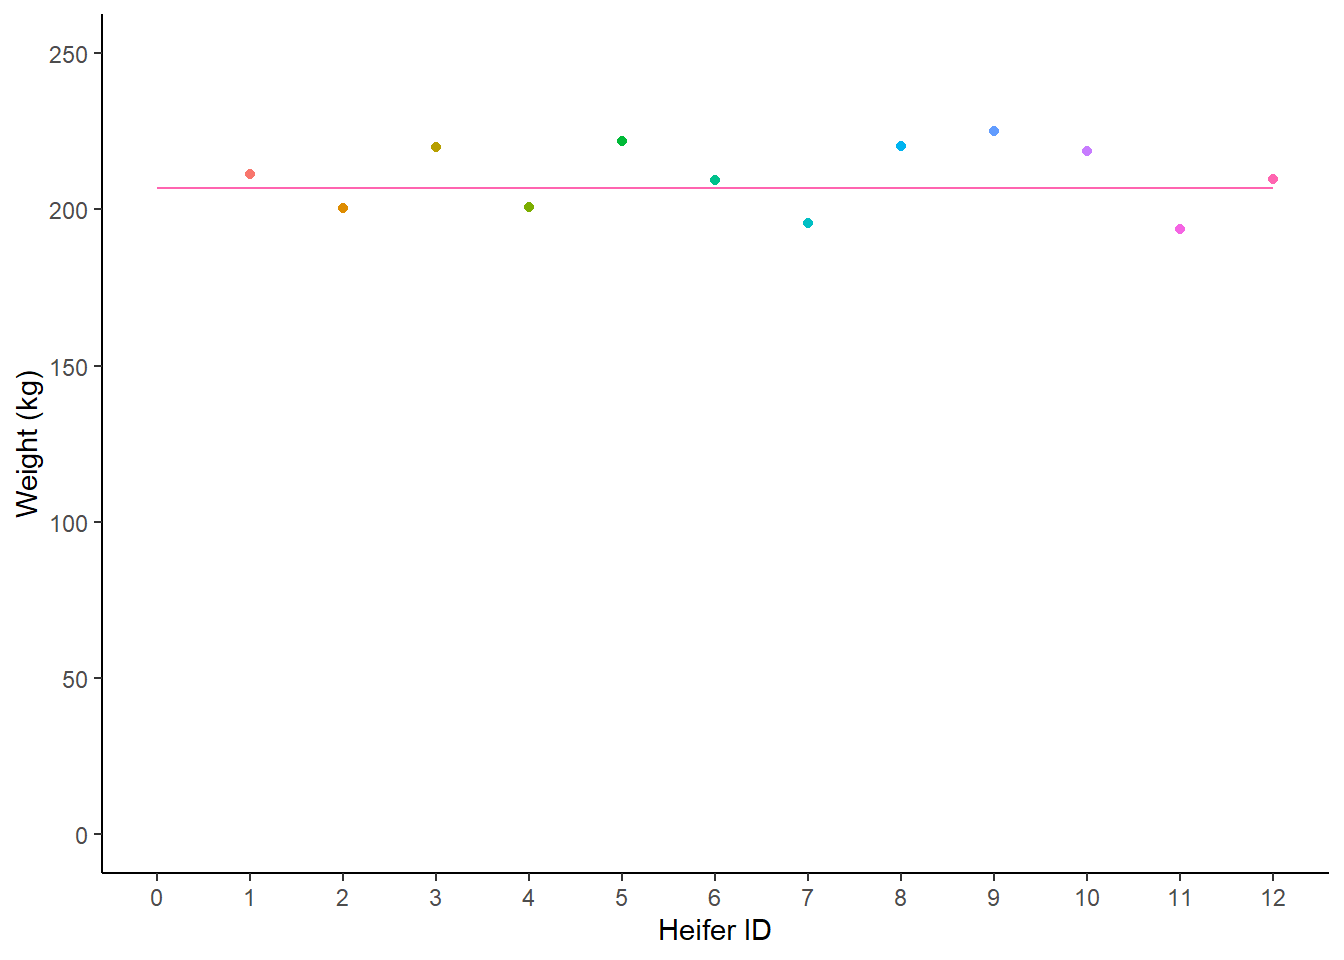 Weight (kg) of 12 heifers, with a human-estimated best fit line